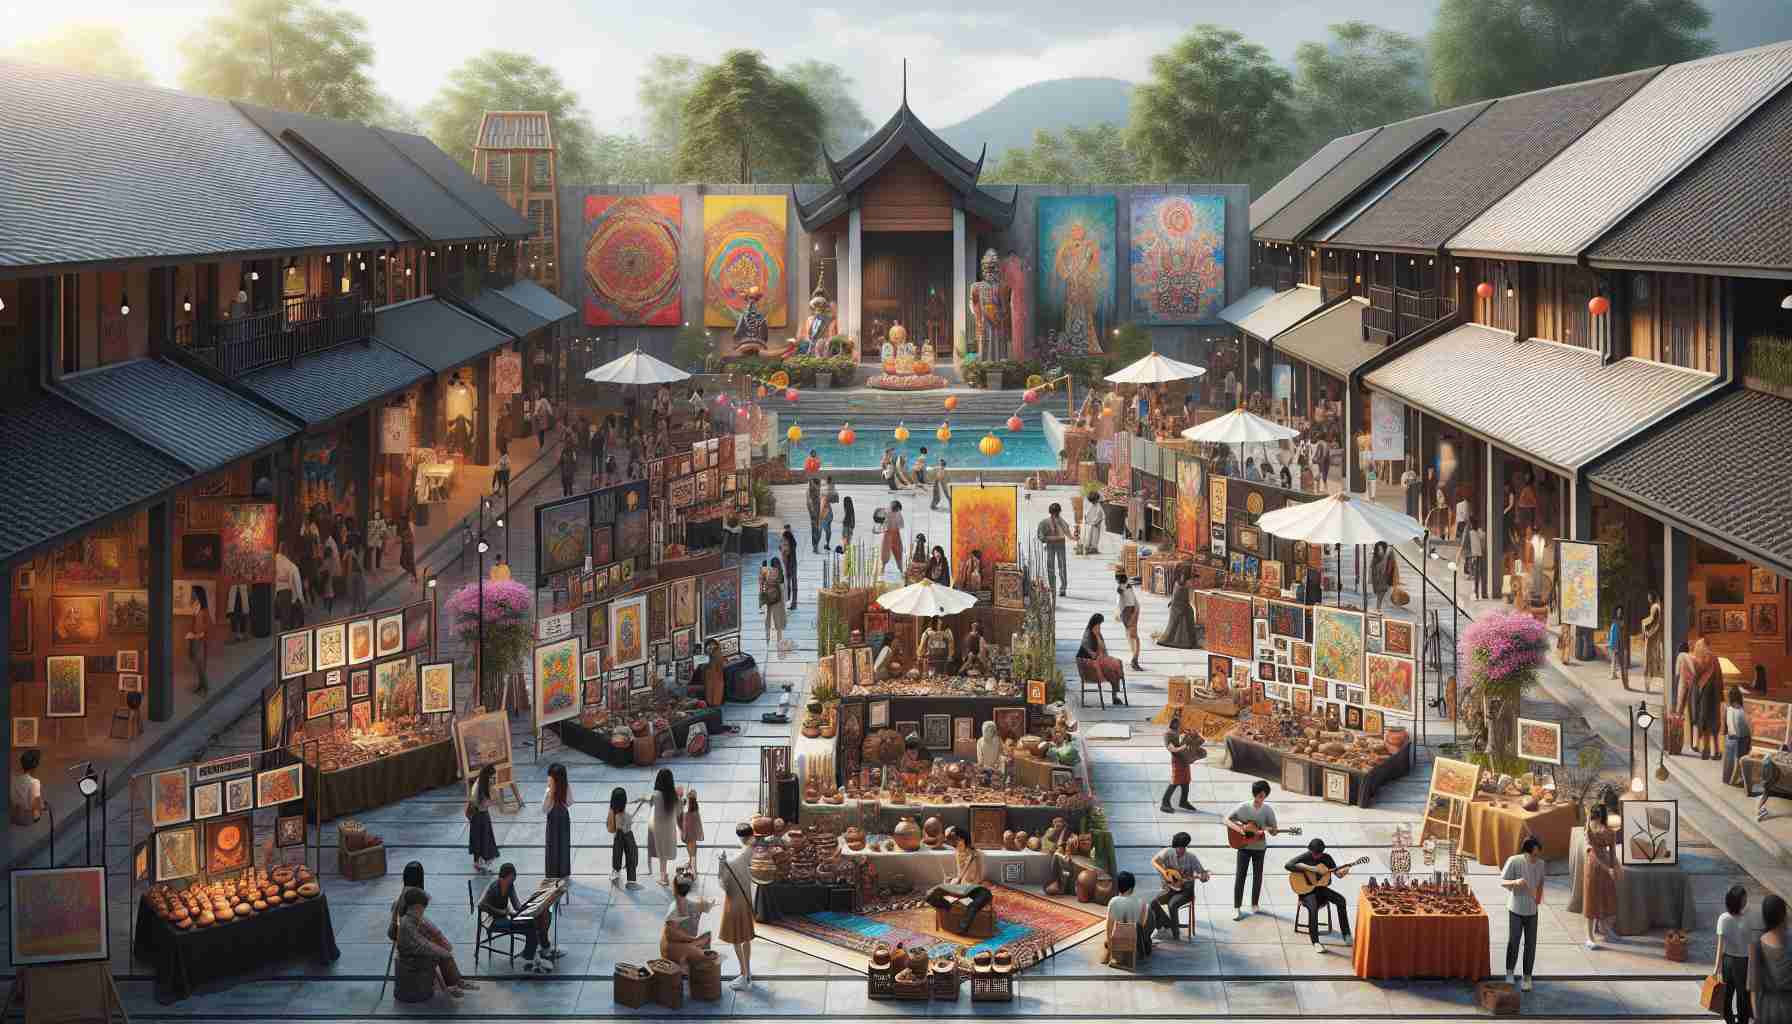 A realistic, high-definition image depicting a vibrant community art festival. The scene is bustling with color and enthusiasm as local talents from different walks of life come together to celebrate and showcase their skills. The venue is filled with art stalls showcasing diverse art forms - from intricate pottery to vibrant paintings. There are some art installations in the background, adding to the creative ambiance of the event. Local musicians can also be seen, strumming their guitars and playing lovely tunes. The crowd is diverse in their descent and gender, all appreciating the exhibition of passion and creativity.